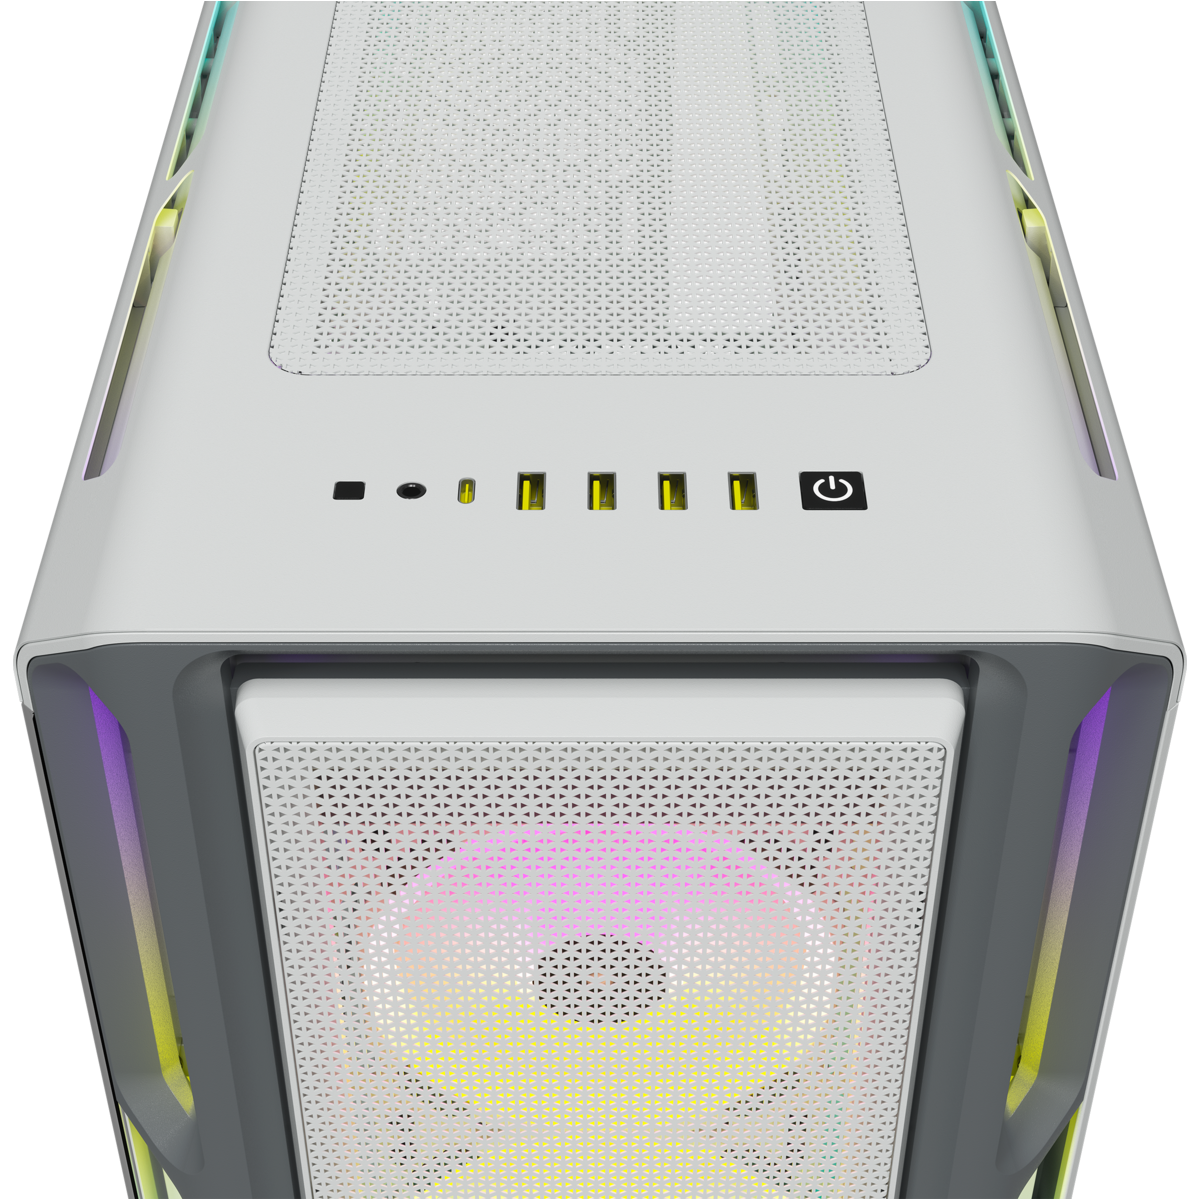 ONE GAMING PC ONEder 3080, SSD, RAM, GB 1 11 Gaming-PC Home, PC GB TB Windows Microsoft by powered GeForce i9 MSI, RTX™ 64 Core™ mit 10 Intel® Prozessor, NVIDIA